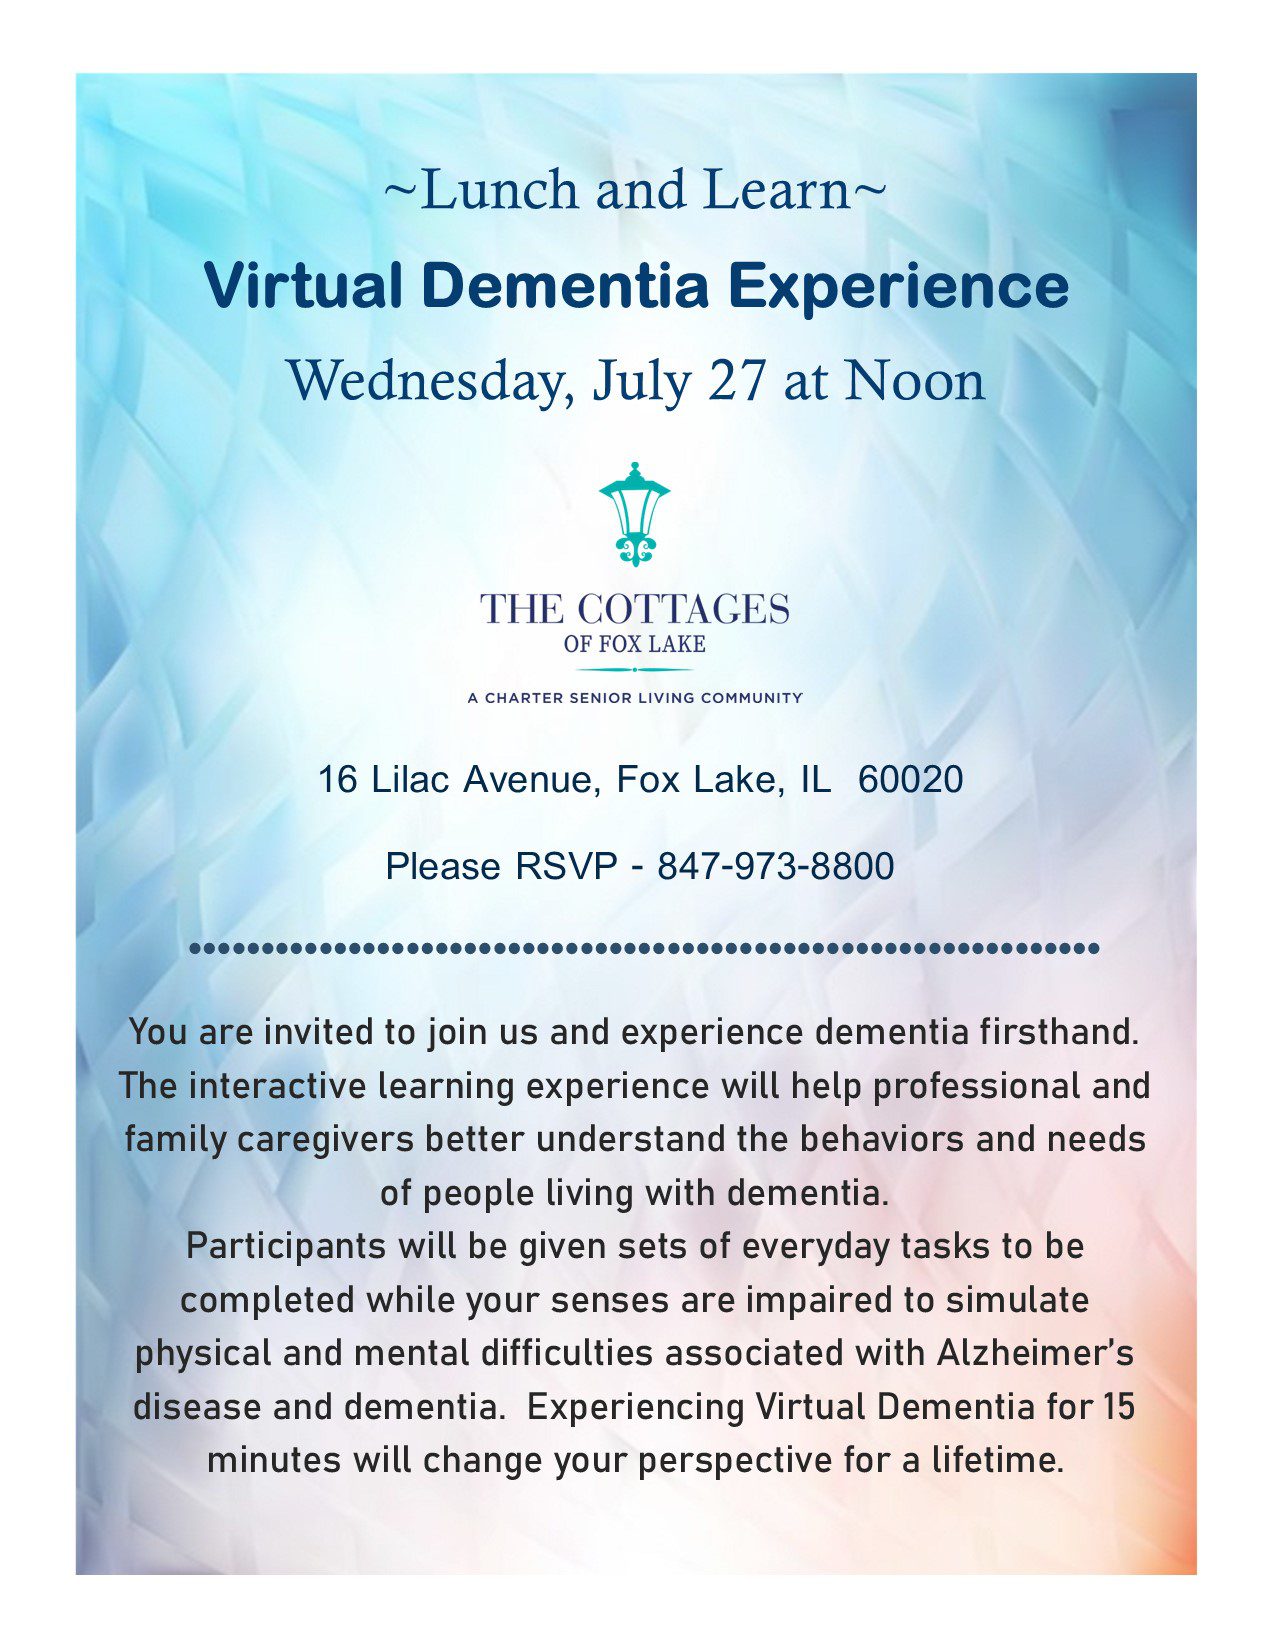 Cottages of Fox Lake - Assisted Living and Memory Care - Lunch and Learn Virtual Dementia Experience